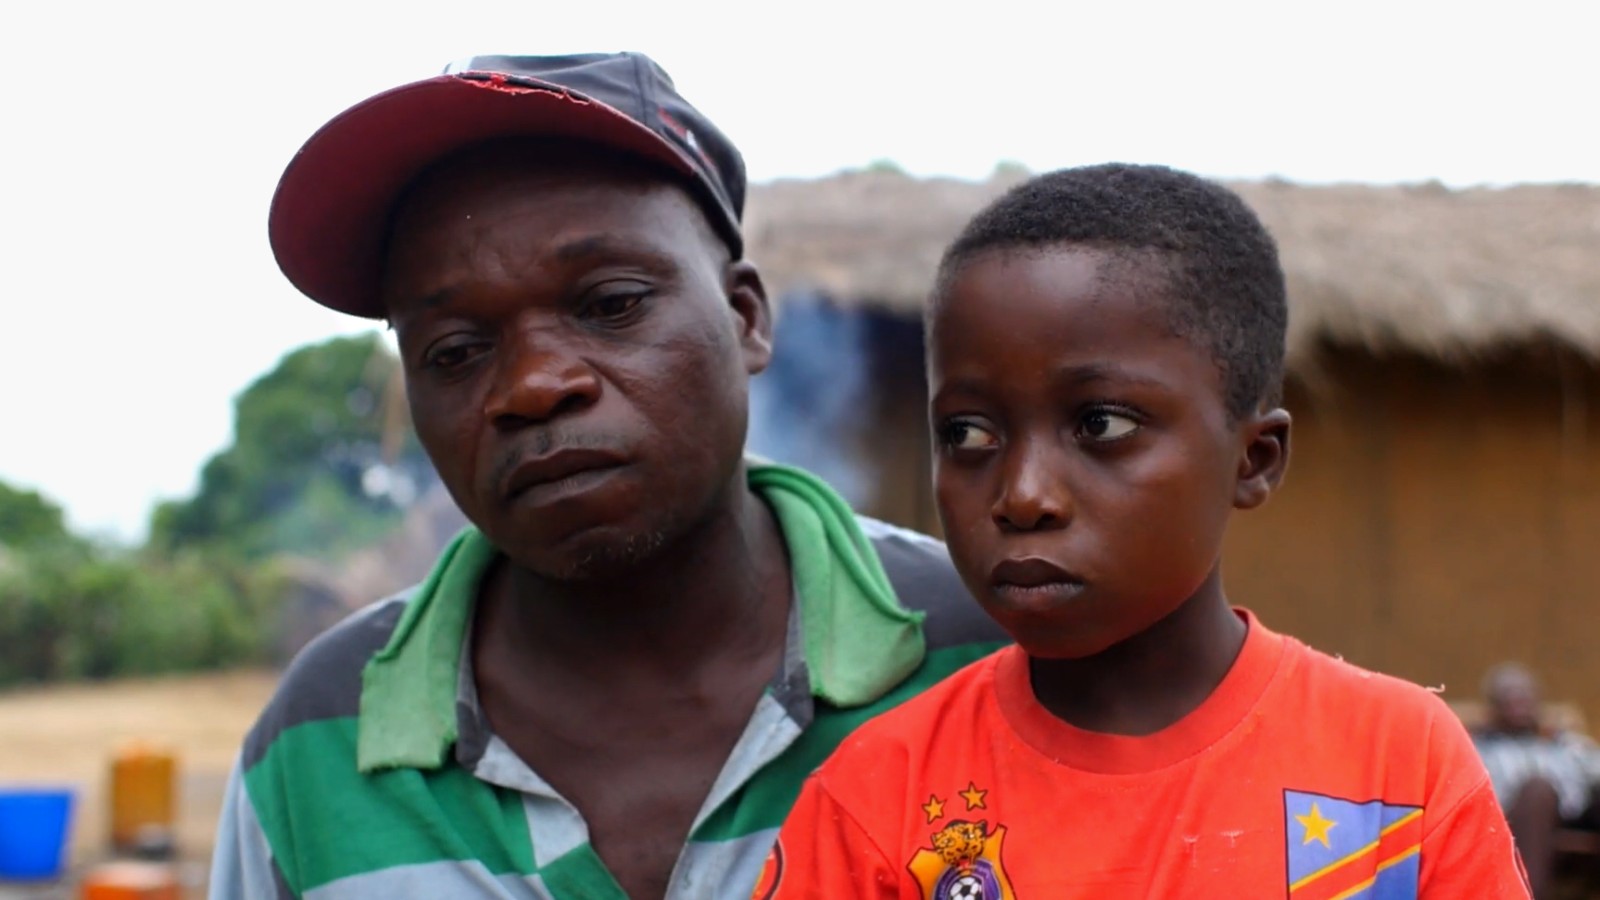 12-year-old Guy is shown with his father.